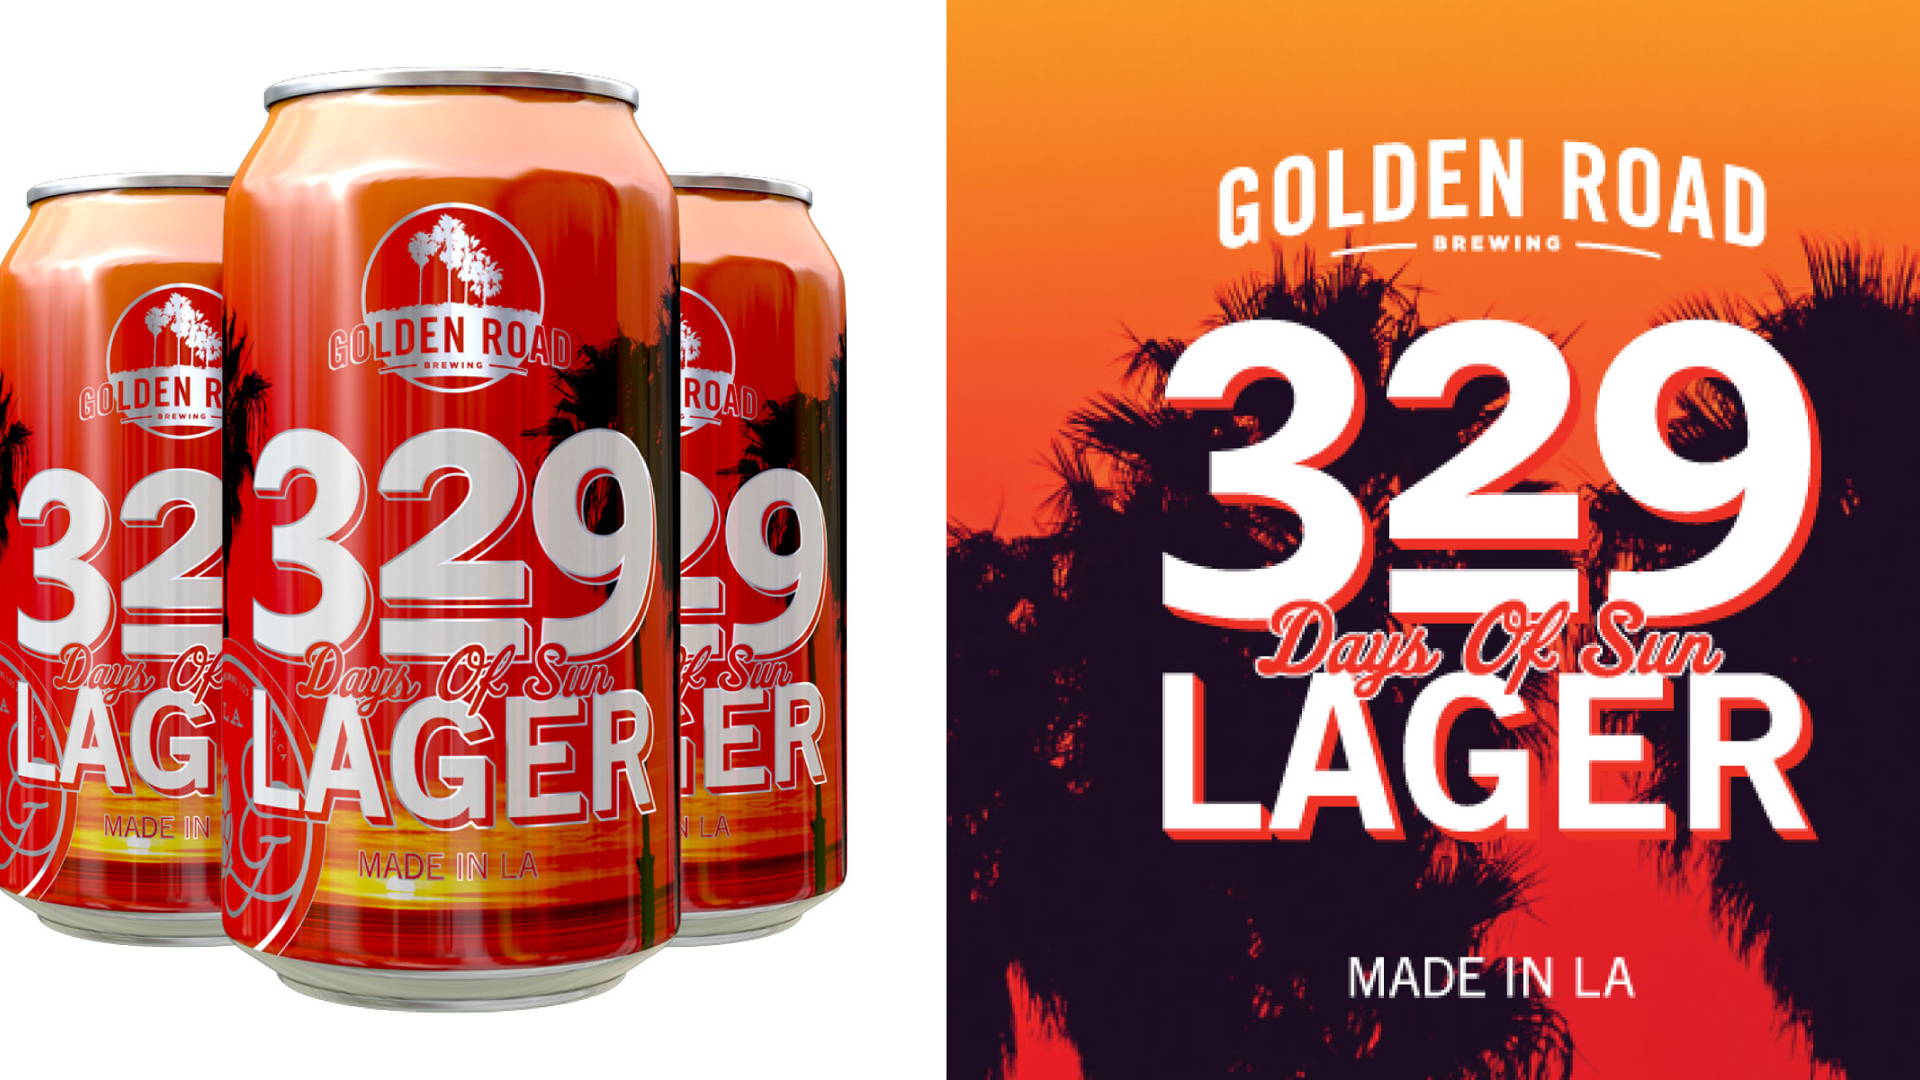 Featured image for Golden Road Brewing's 329 Days Of Sun Lager